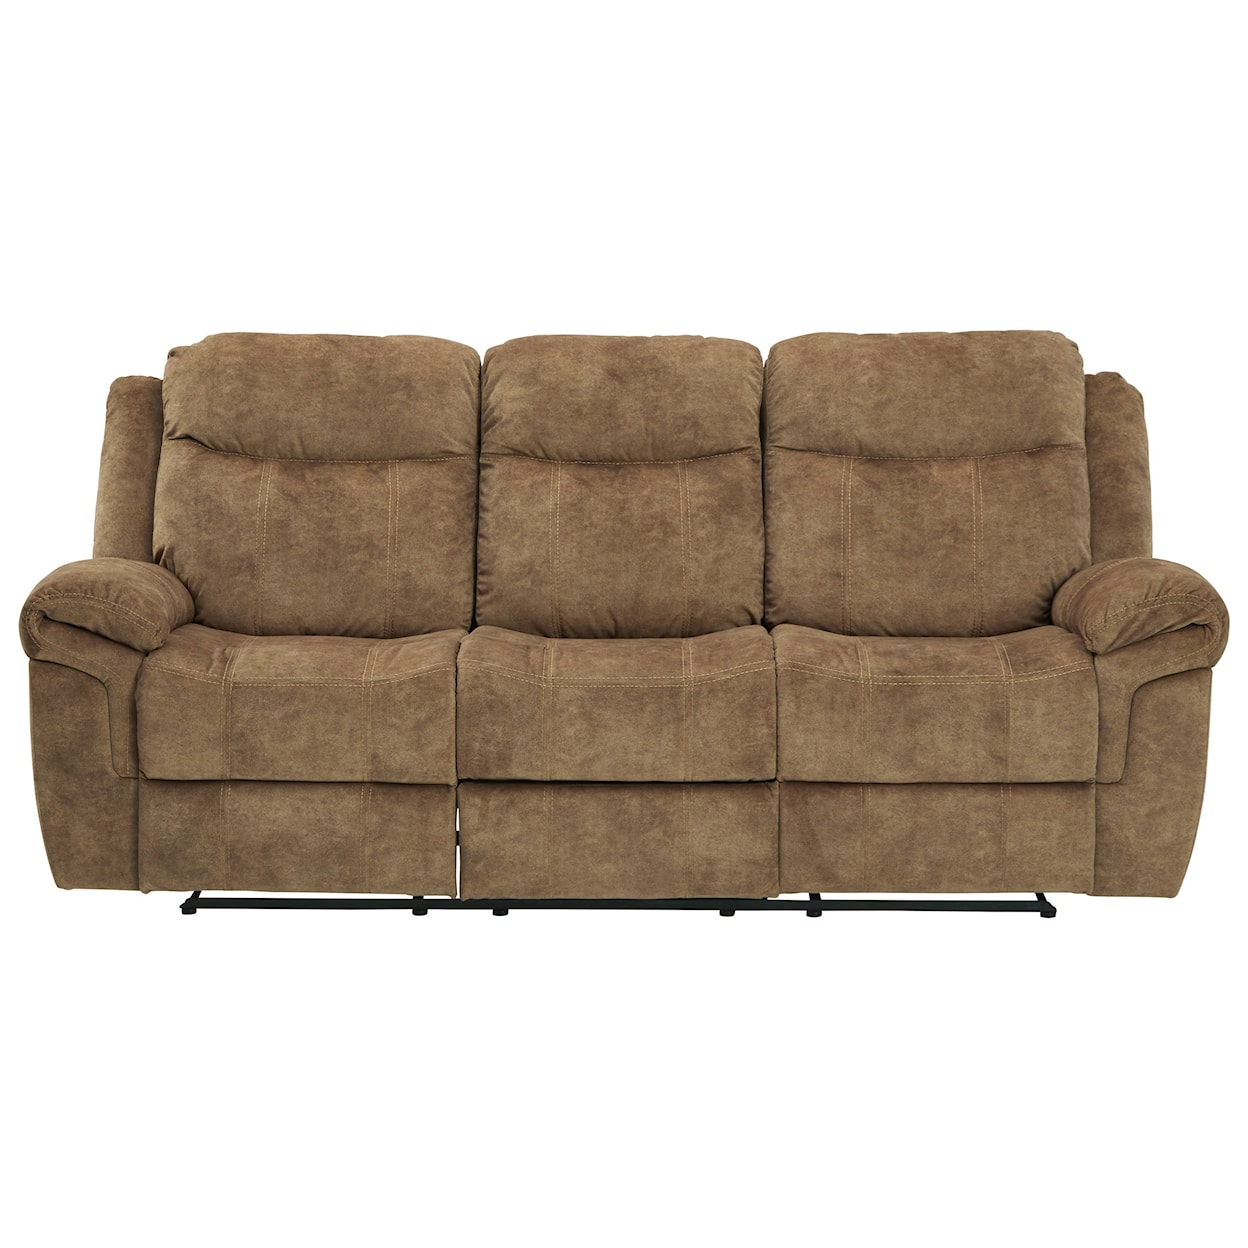 Signature Design by Ashley Furniture Huddle-Up Reclining Sofa w/ Drop Down Table